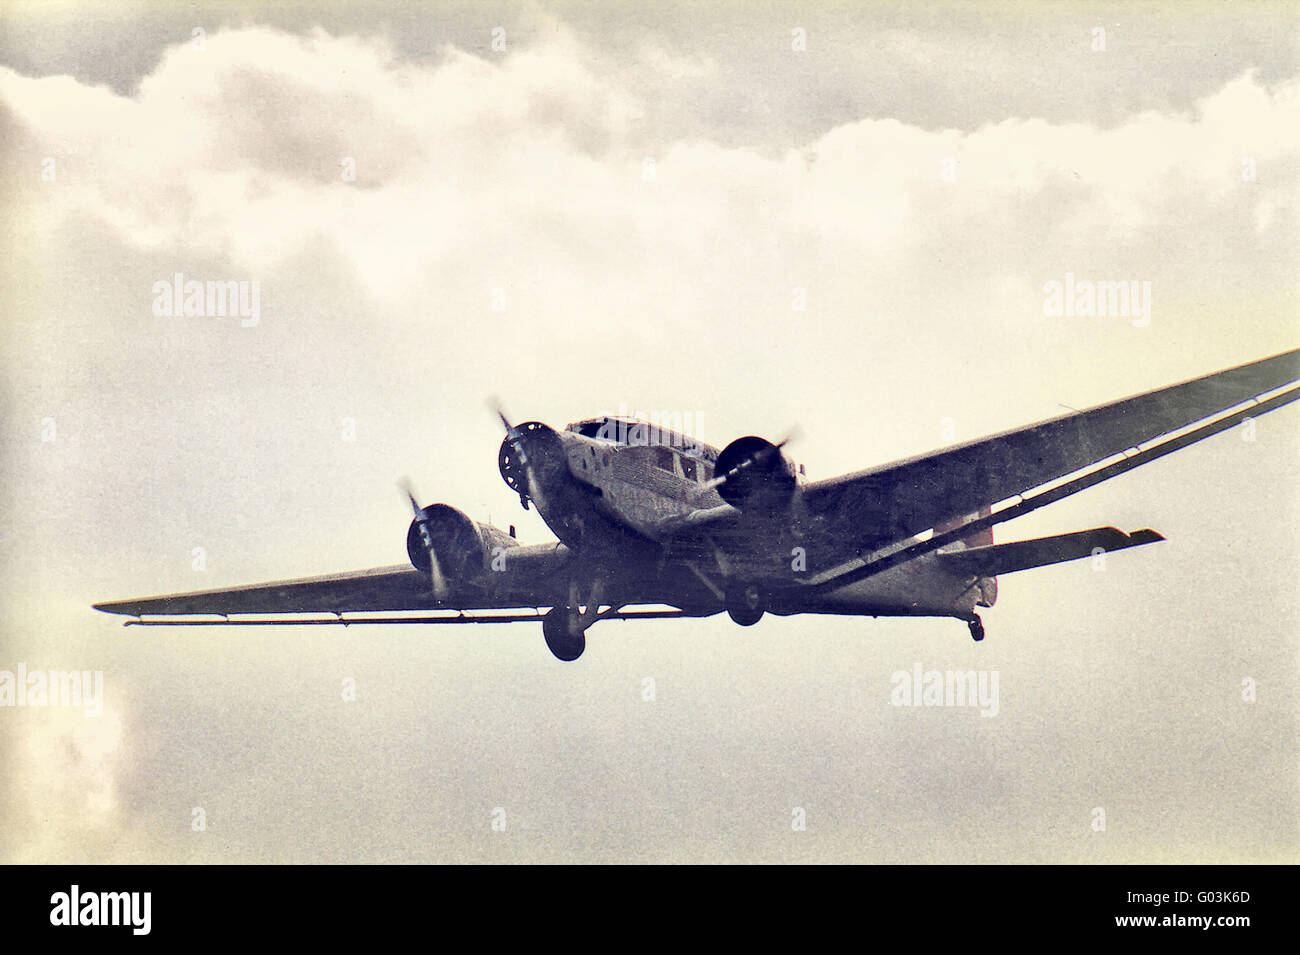 Propeller aircraft Ju 52 in the historic flyover Stock Photo